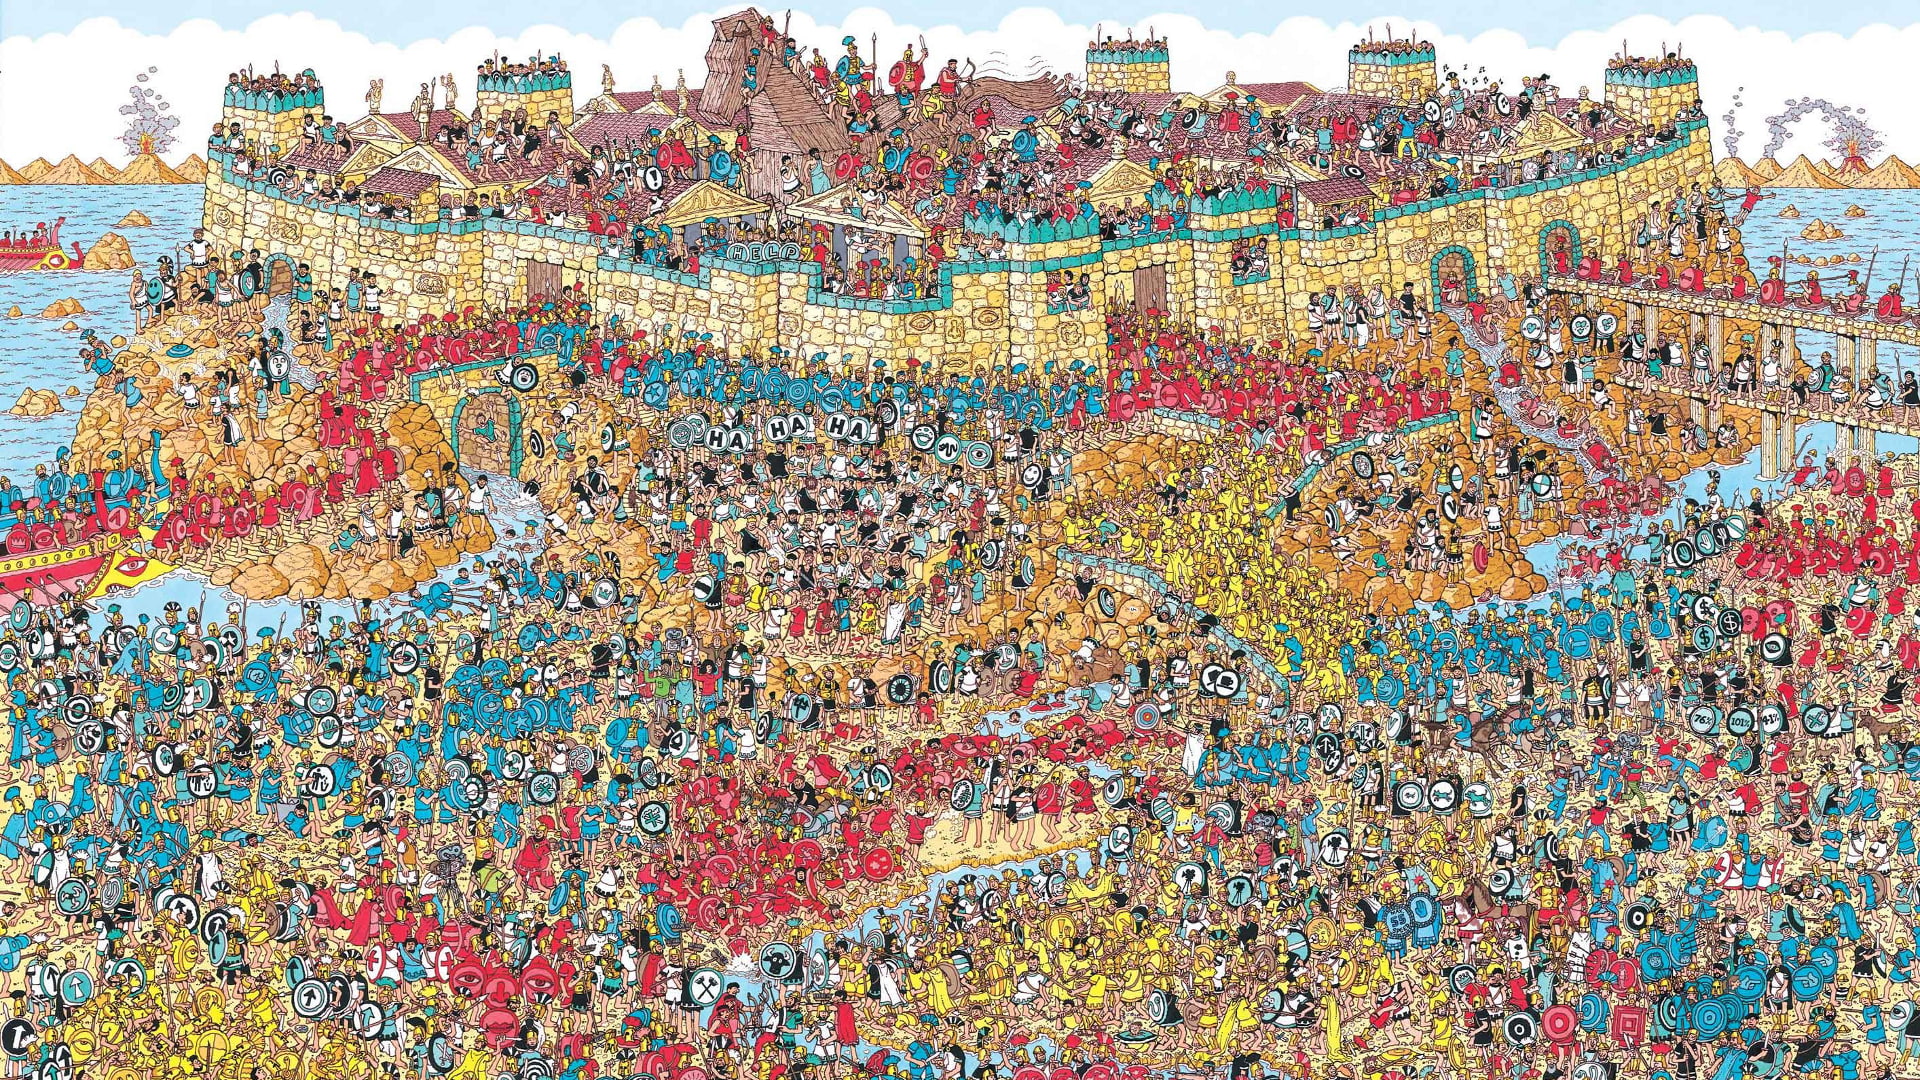 Waldo, puzzles, Where's Wally, multi colored, backgrounds, no people